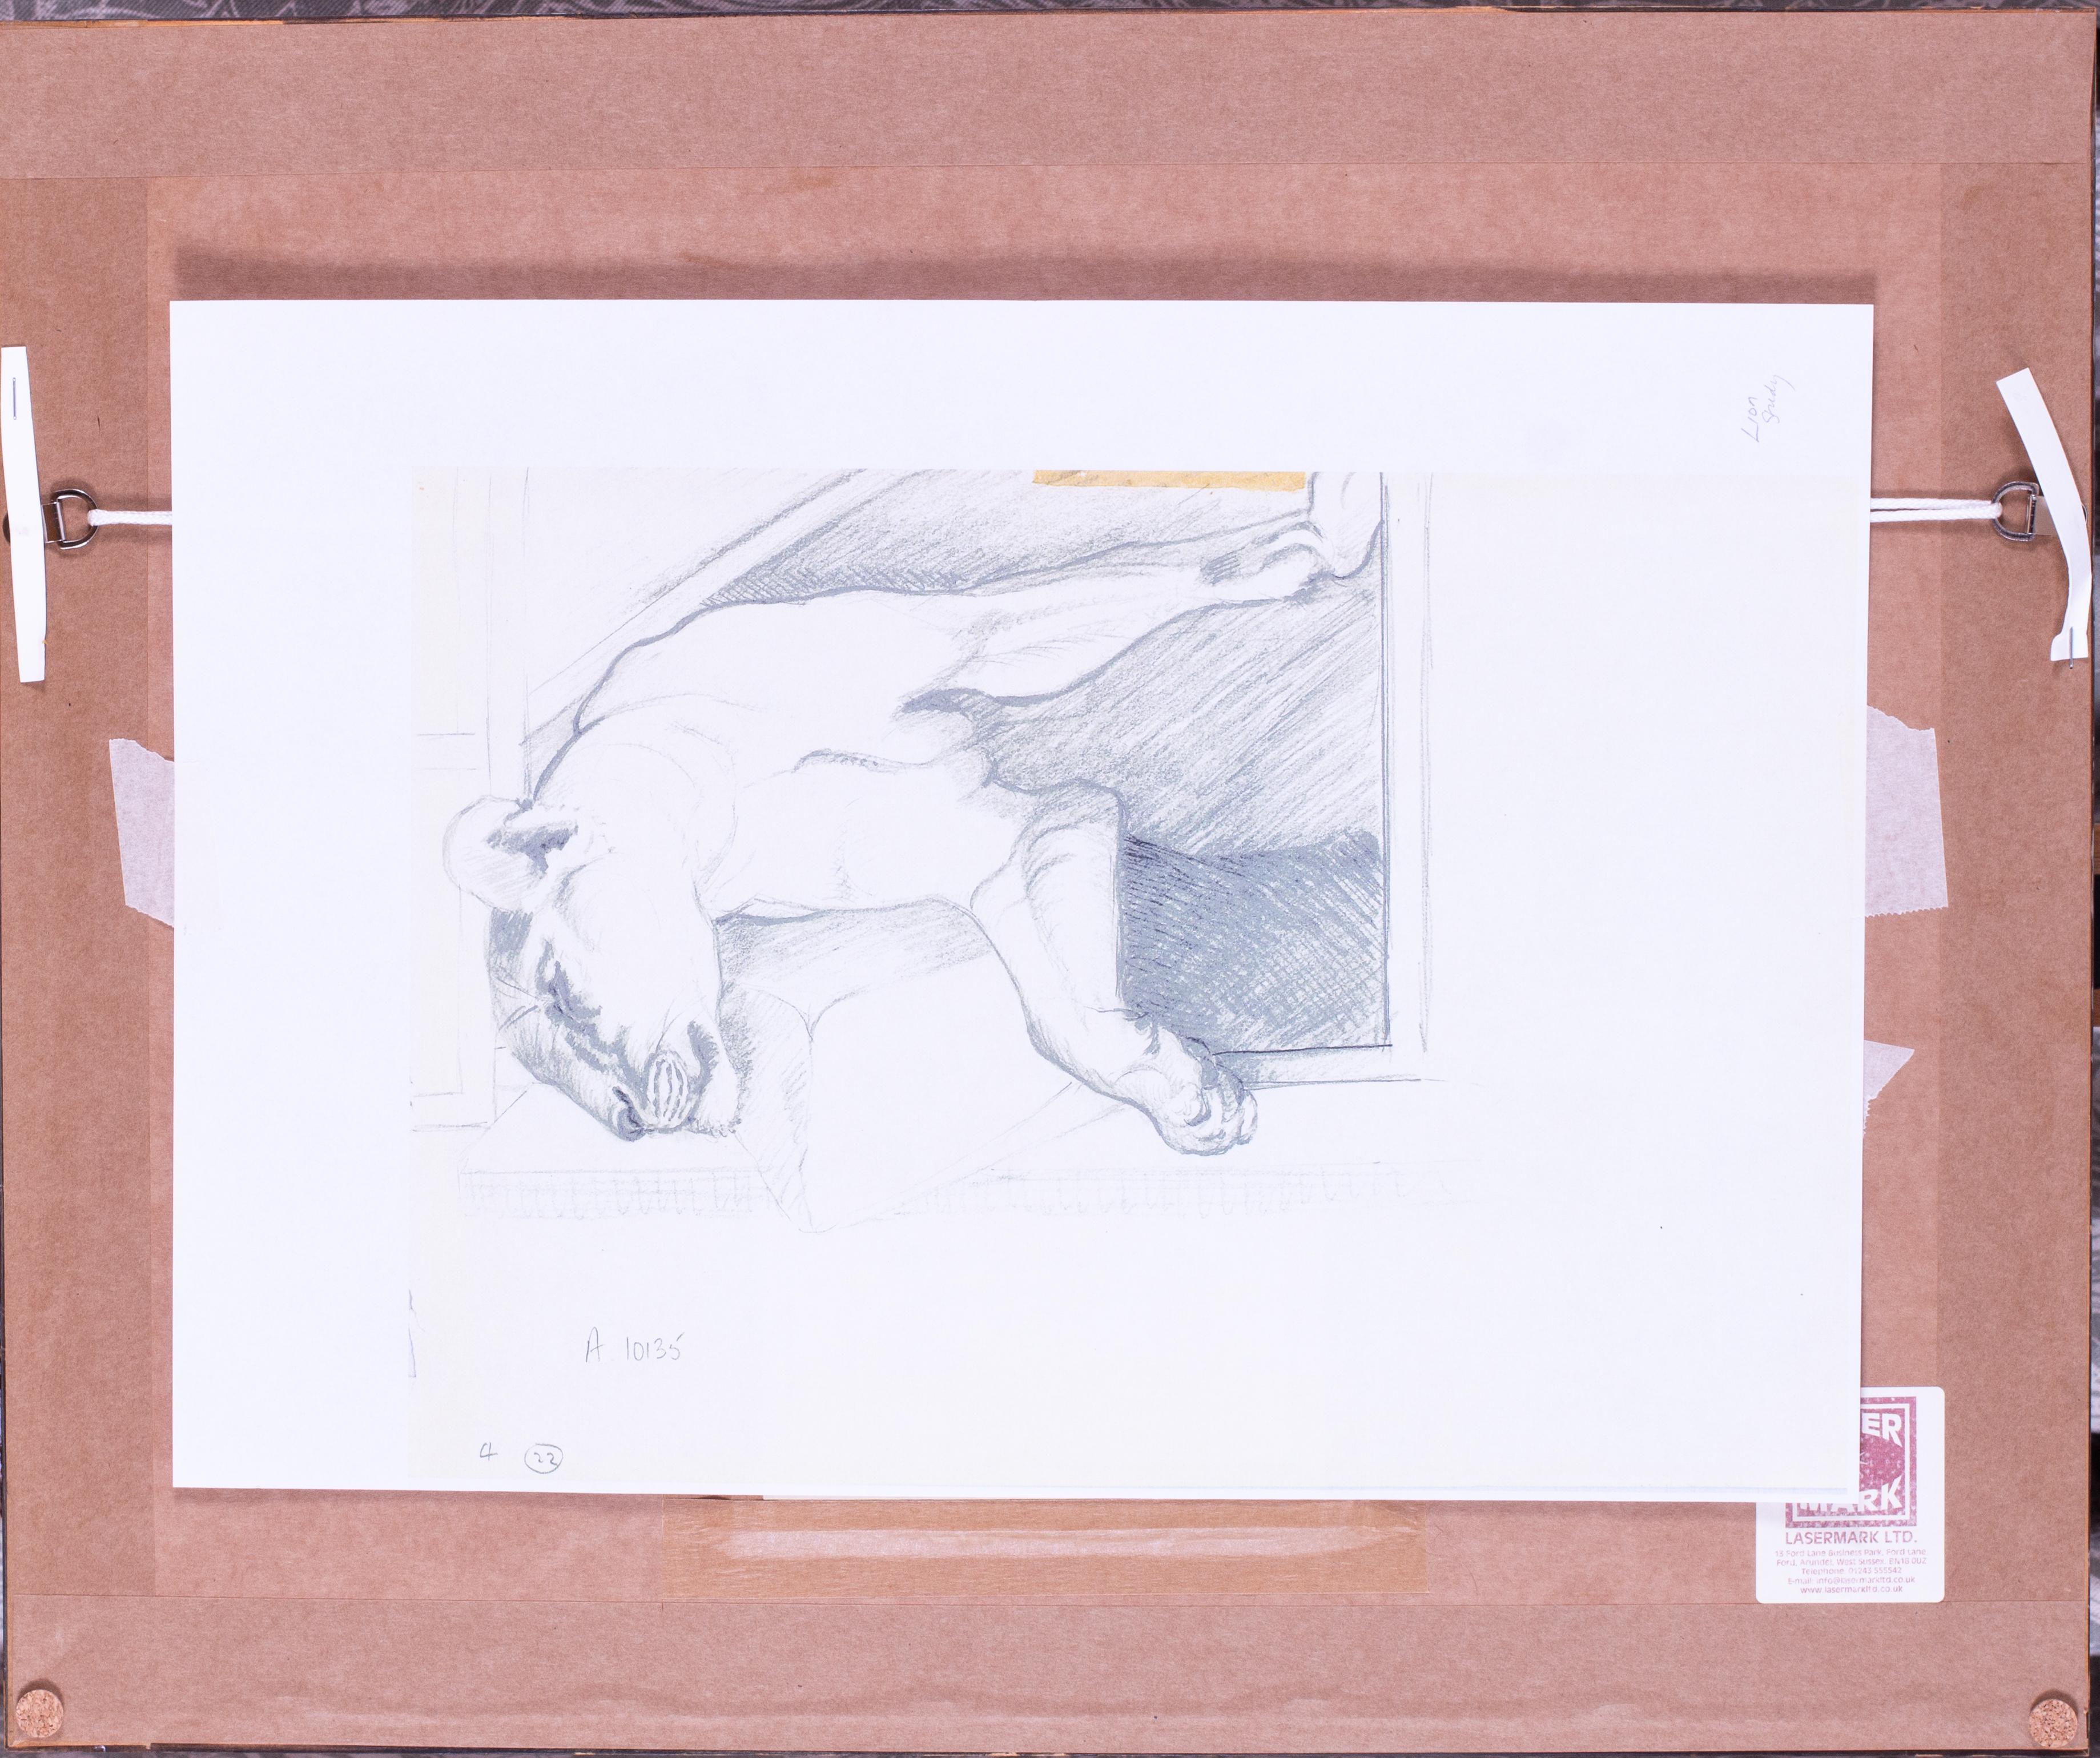 Joy Adamson, author of 'Born Free', pencil drawing of a lioness, with provenance 1